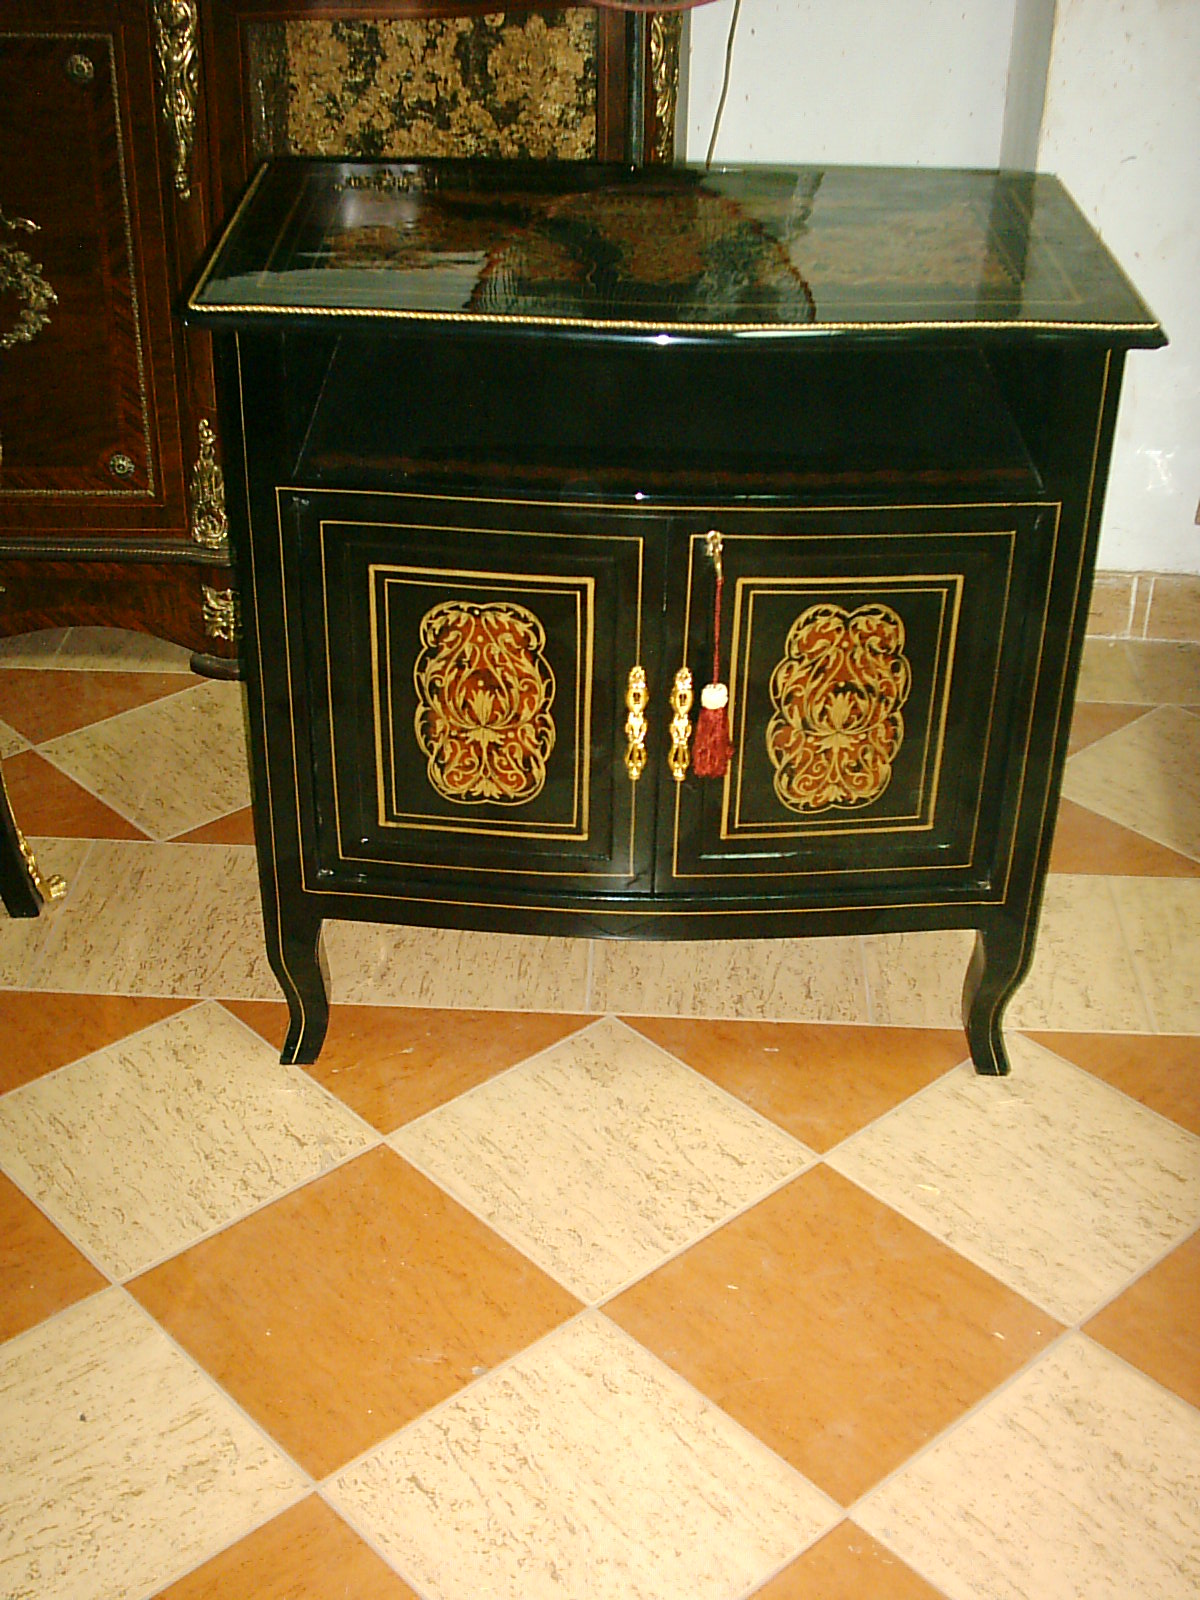 antique furniture reproductions French, Italian, English, Spanish, Victorian Furniture antiques 